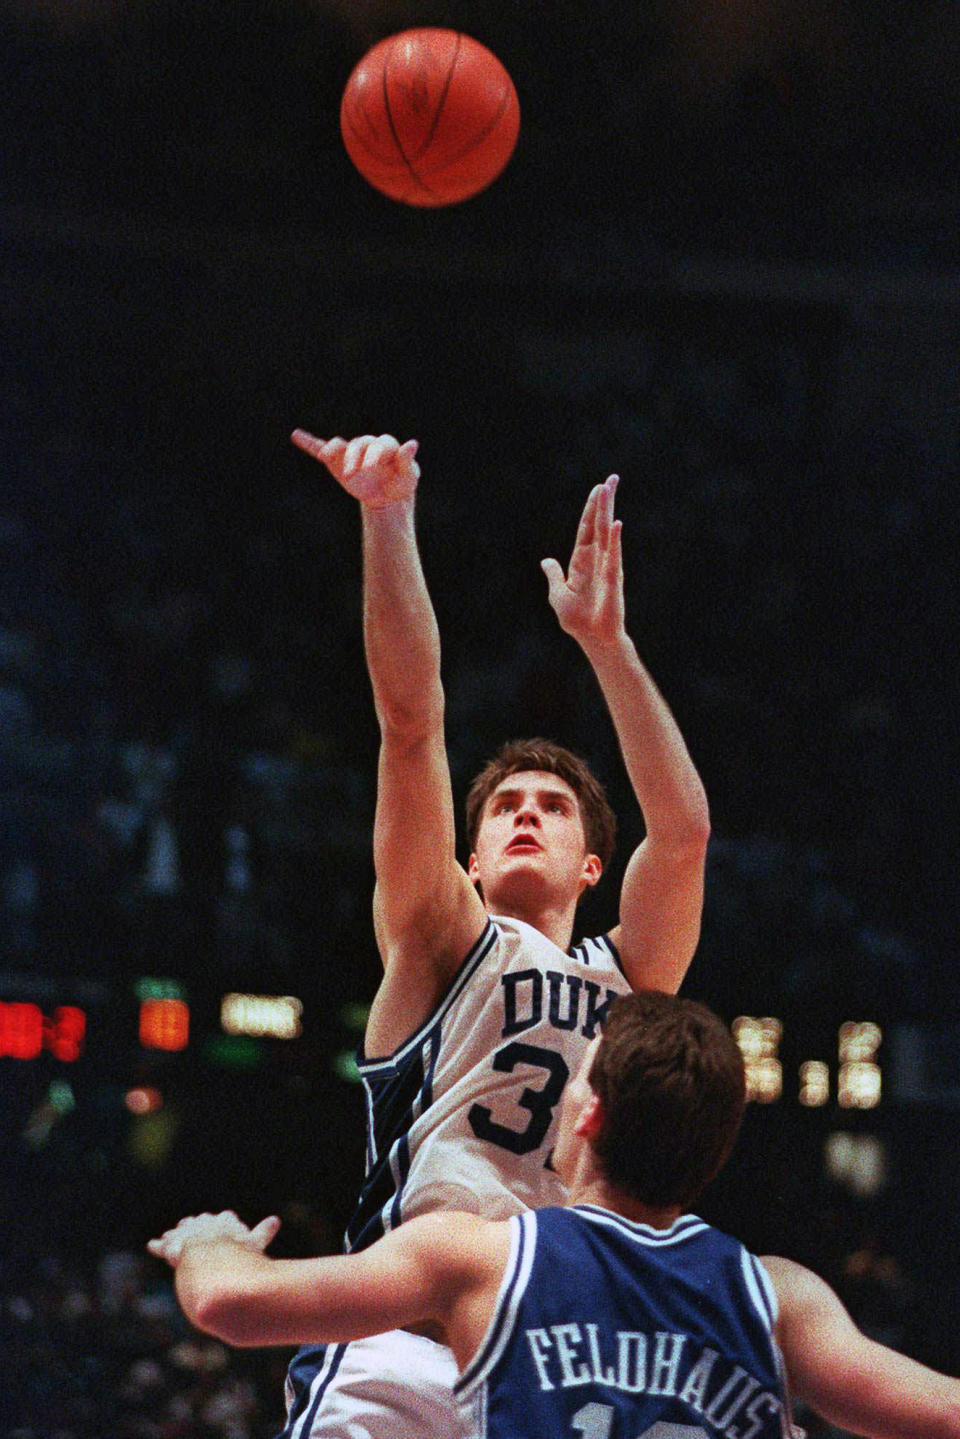 FILE - Duke's Christian Laettner takes the winning shot in overtime over Kentucky's Deron Feldhaus for a victory in the East Regional final NCAA college basketball game in Philadelphia on March 28, 1992. How well do you know the men’s NCAA Tournament? Try this AP trivia quiz about the history of March Madness without help from search engines. (AP Photo/Charles Arbogast, File)